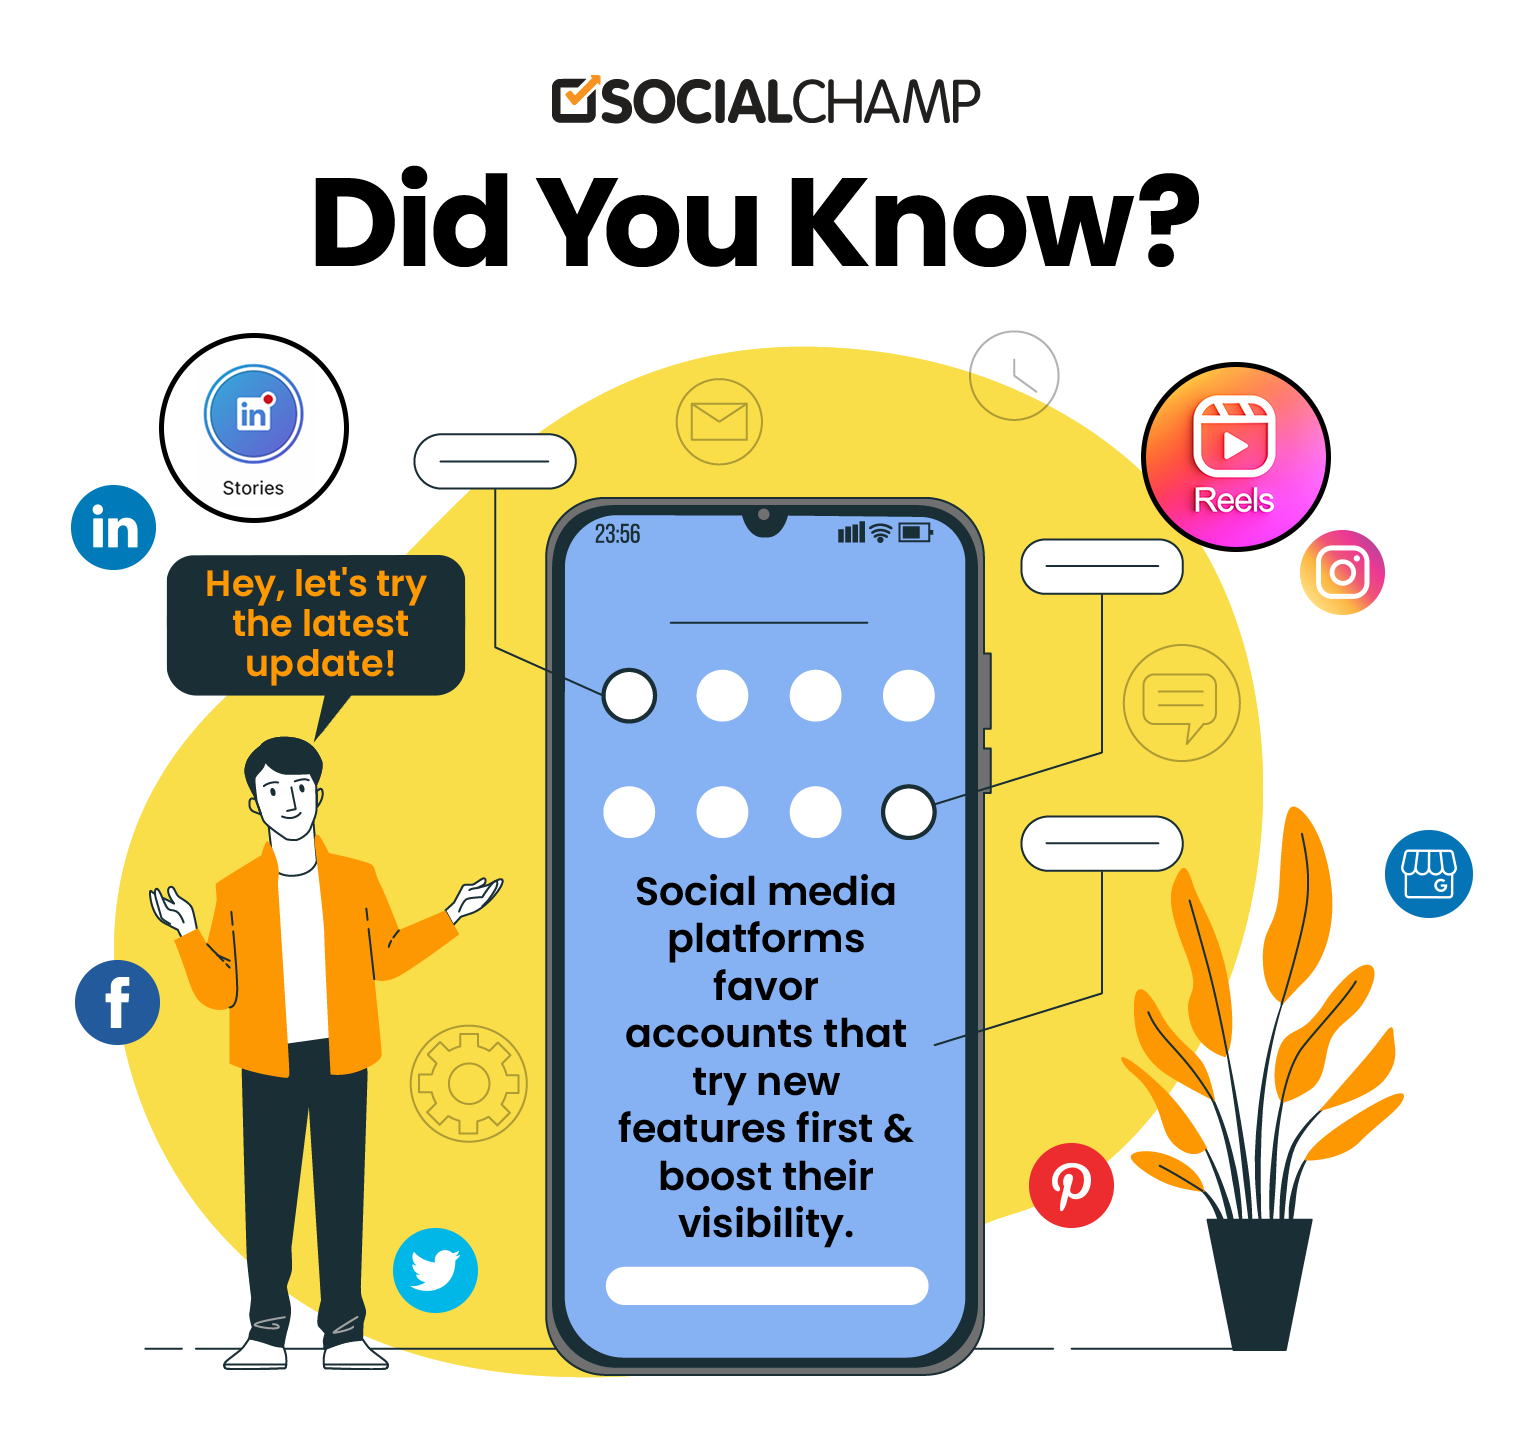 Did you know social champ